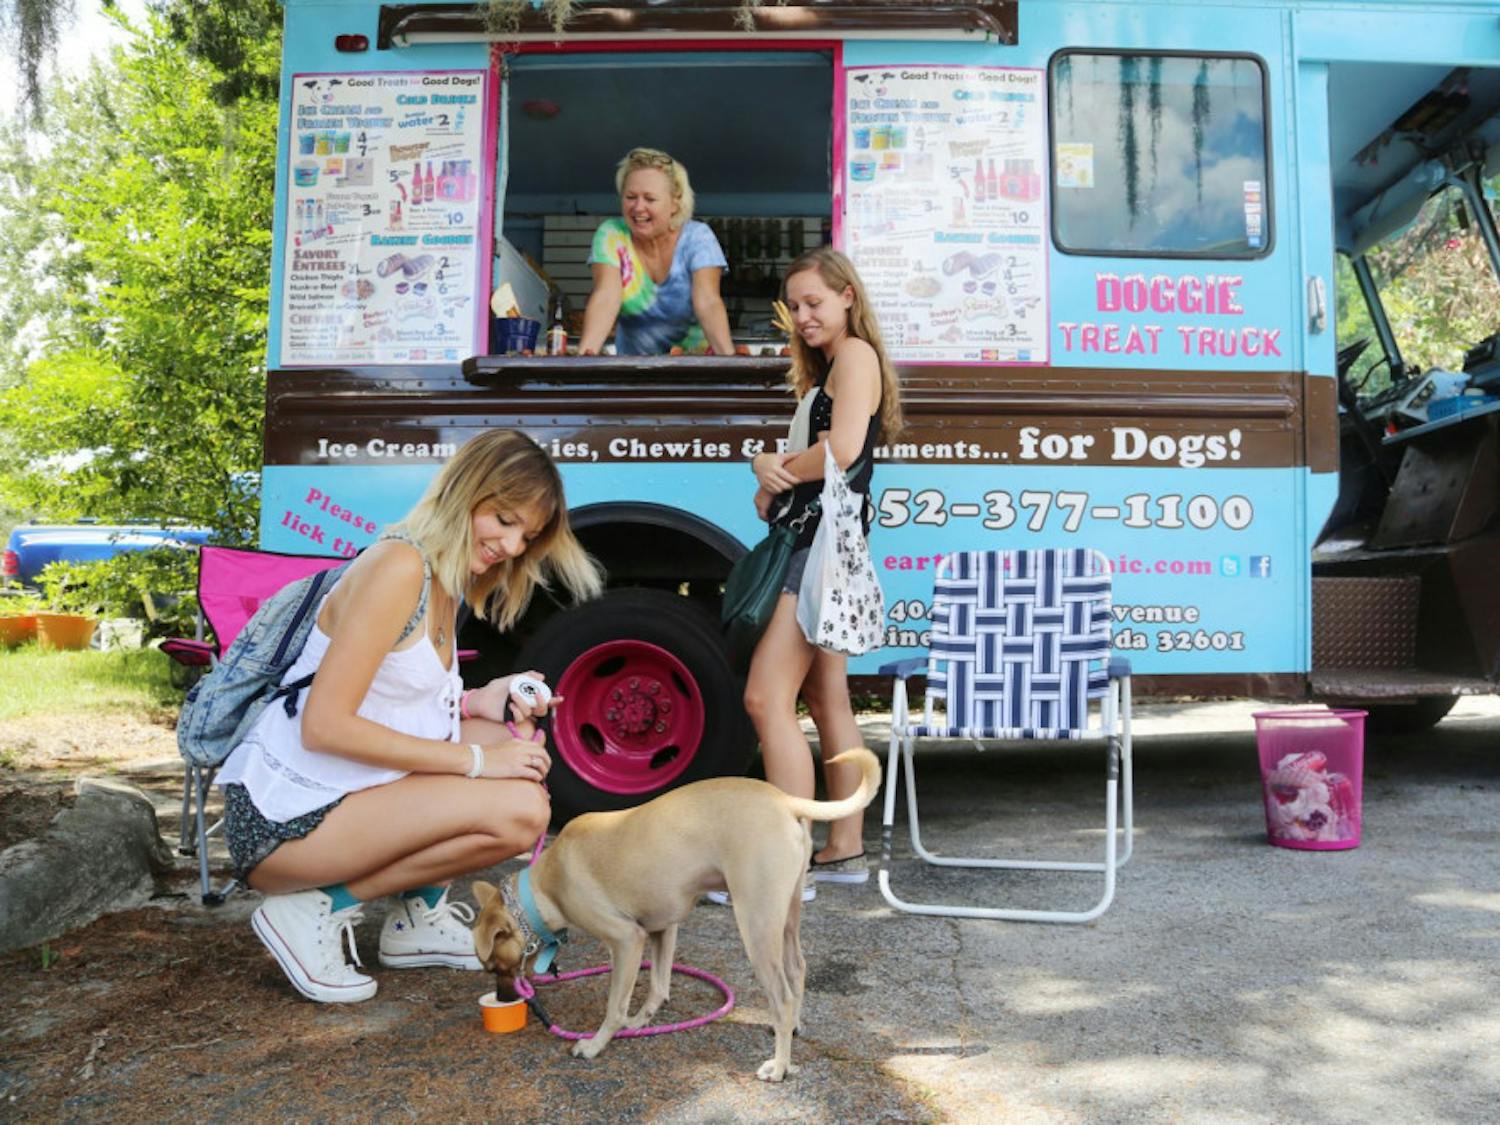 From left, UF animal sciences seniors Marien Armenteros, 23, and Sarah Flanders, 21, feed doggy ice cream to Toby, which was purchased from Paige Anderson, 50, at the Earth Pets Doggie Treat Truck at the Earth Pets Woofstock 2014 event on Saturday.